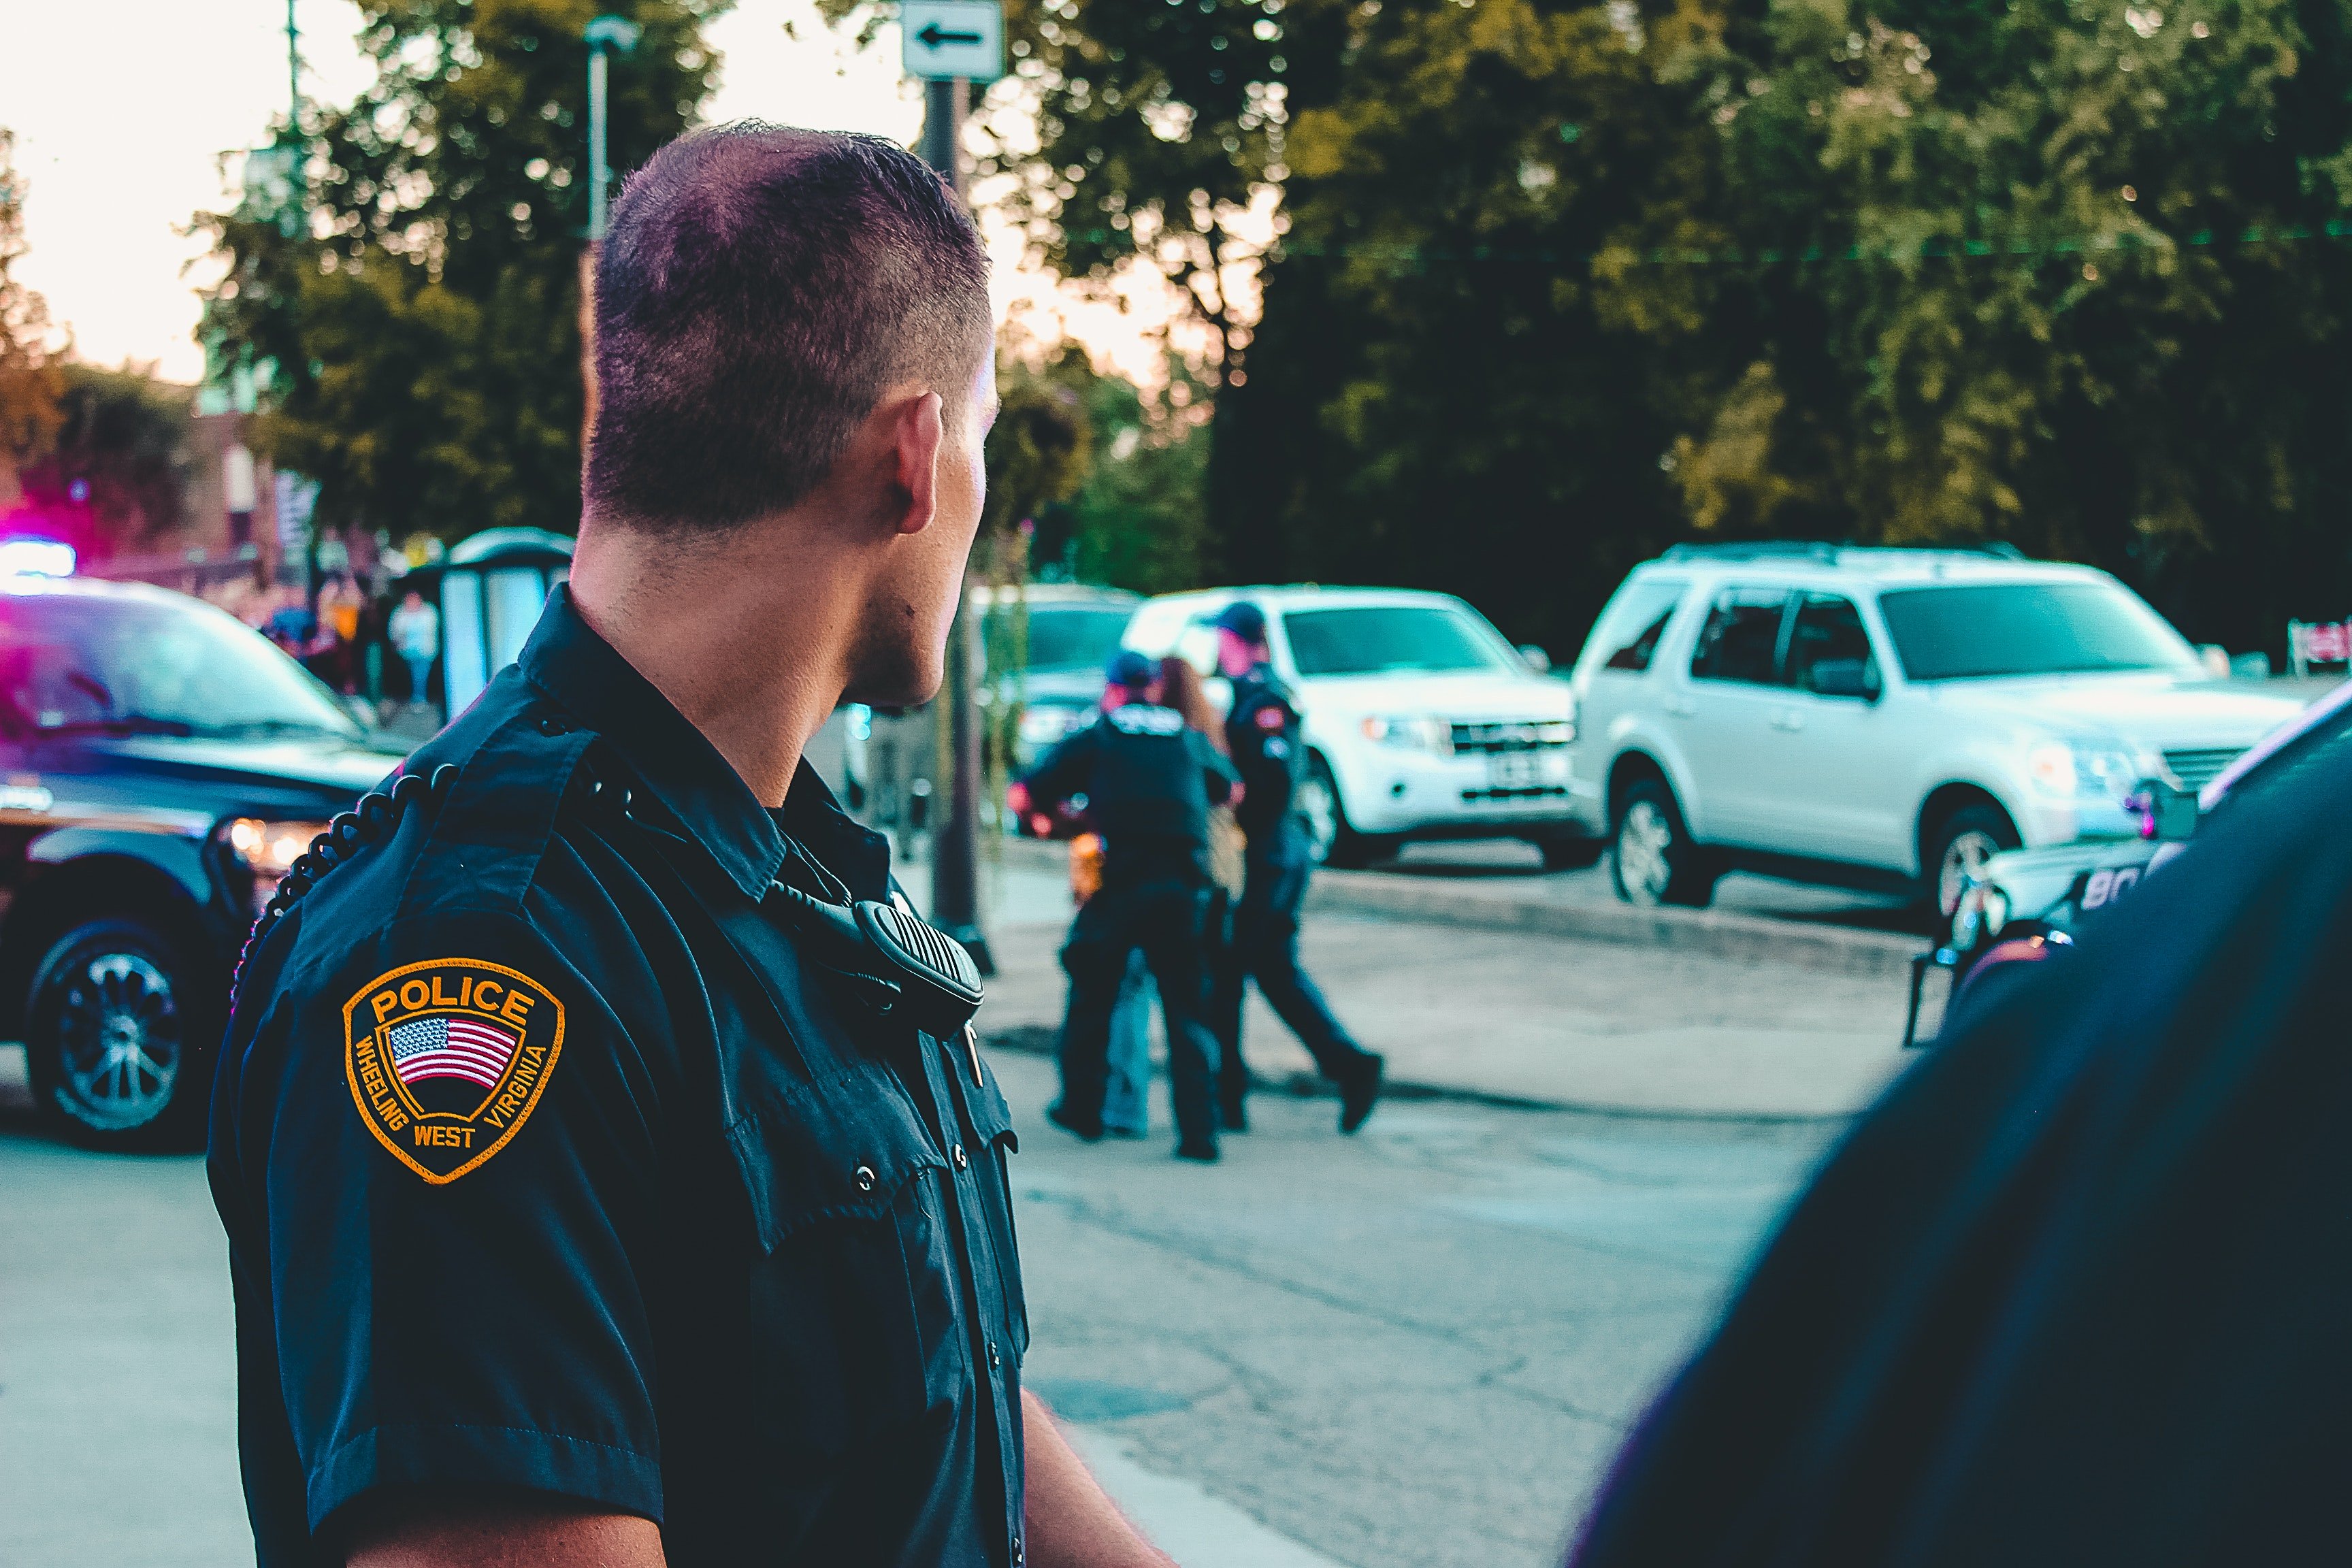 A police officer looks on as action unfolds in the street before him | Photo: Pexels/Rosemary Ketchum